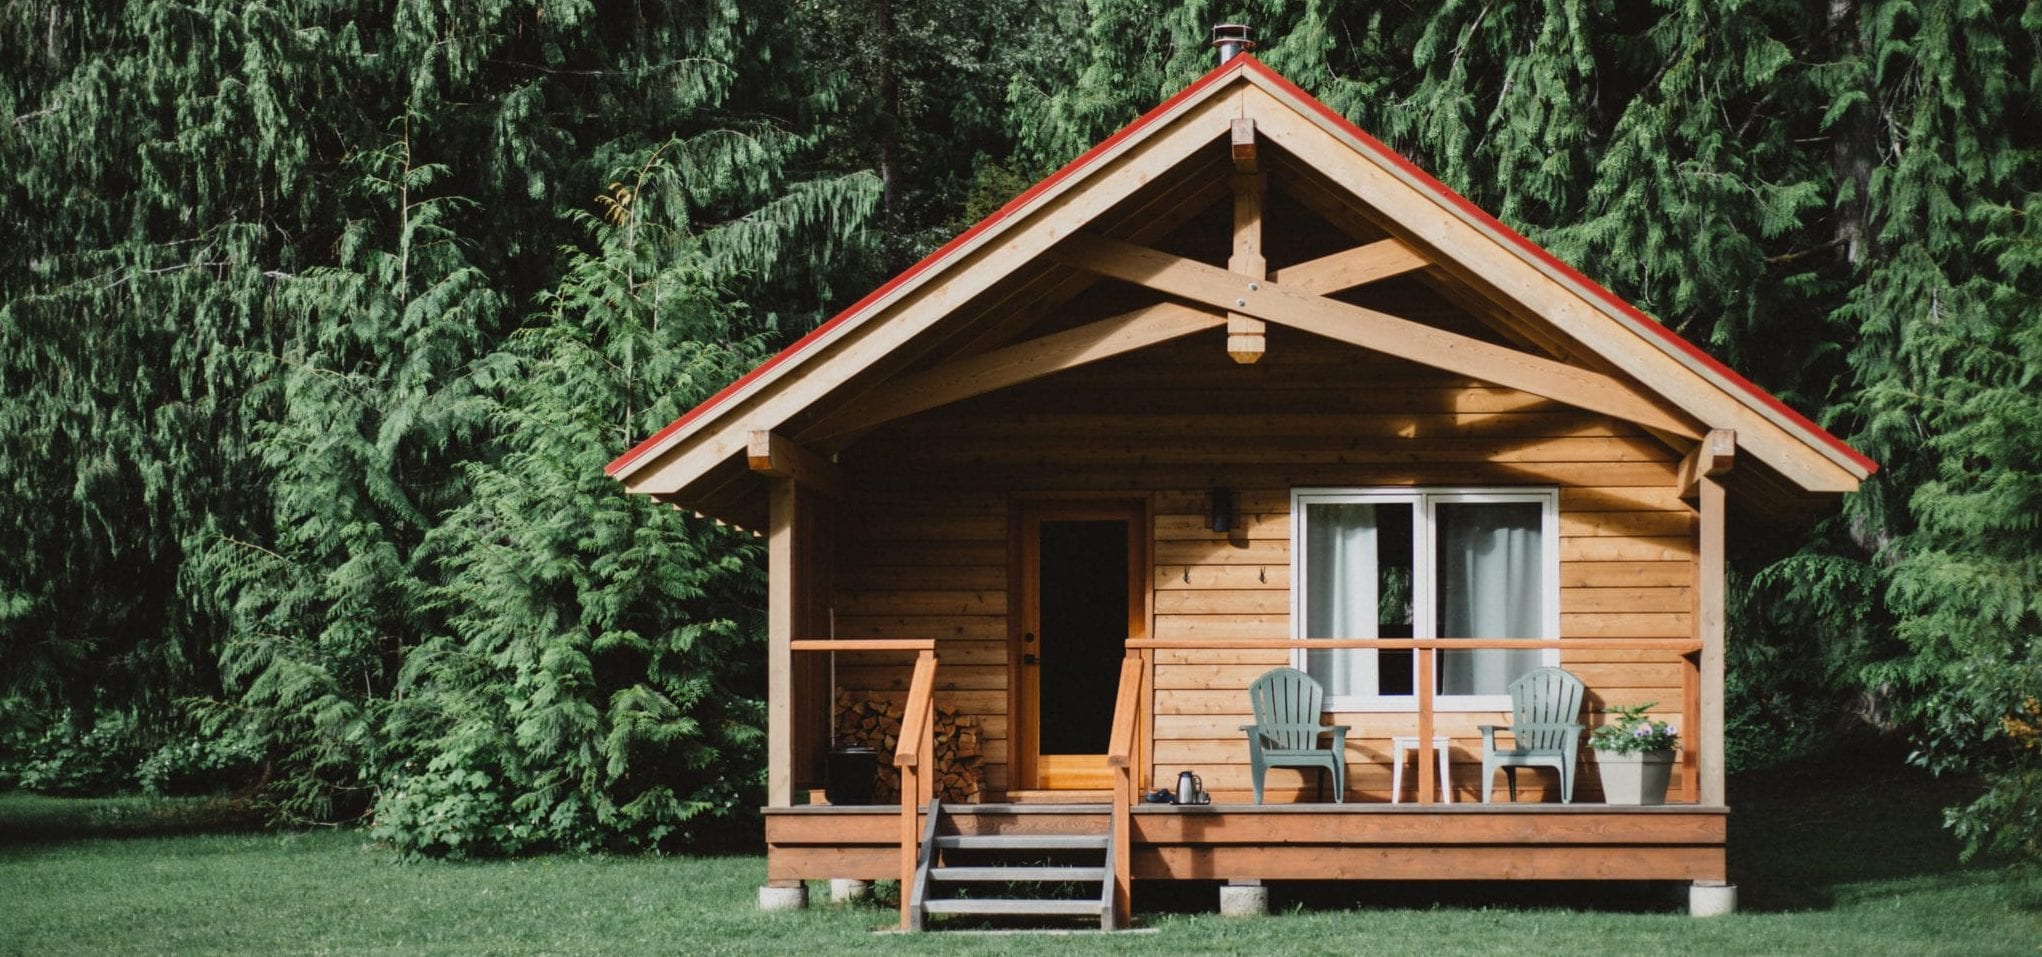 Stay in your own log cabin